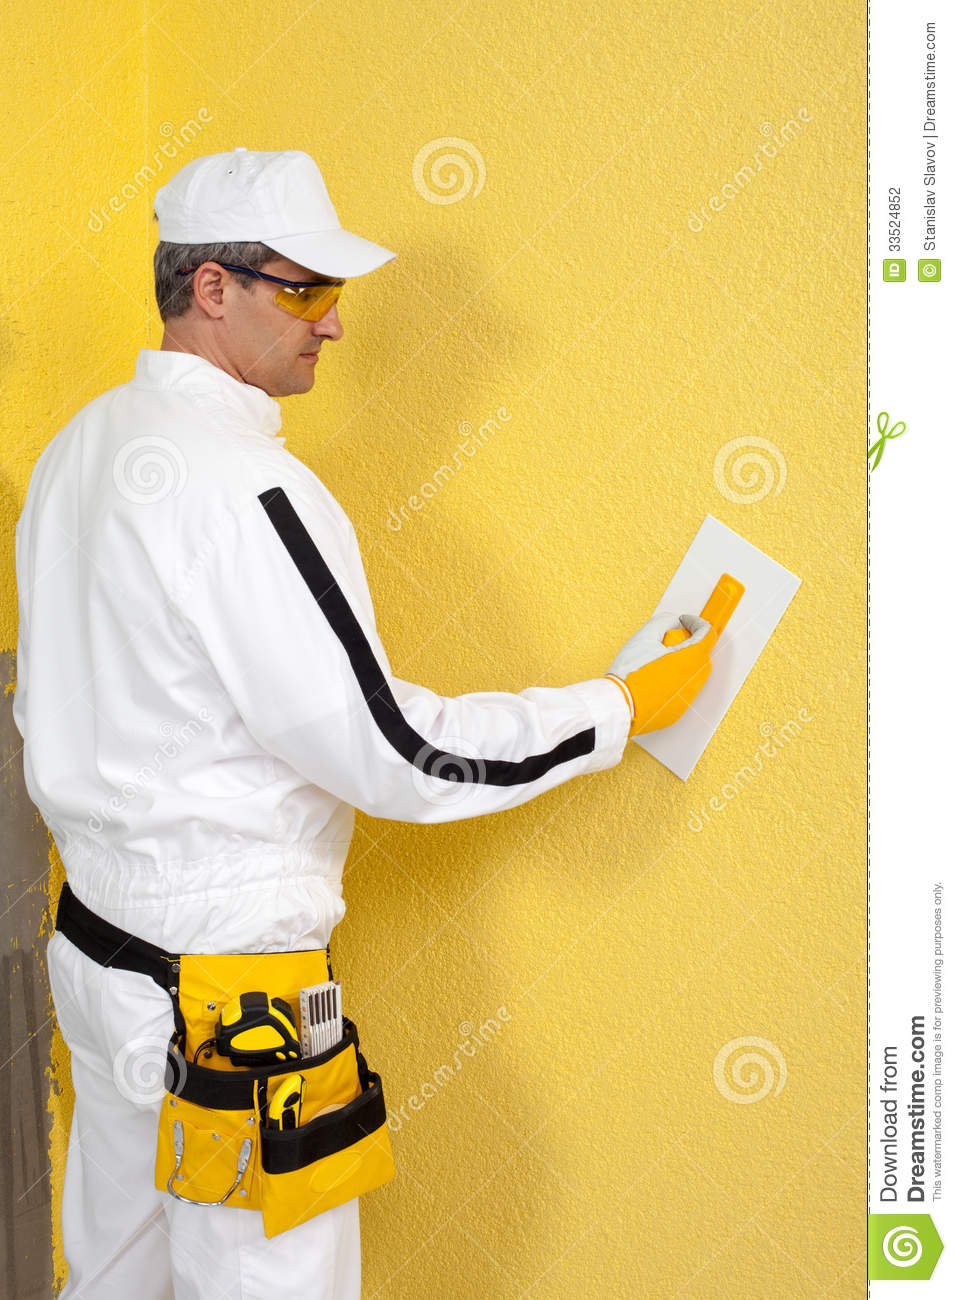 Worker Spreading A Plaster On A Wall Stock Photography   Image